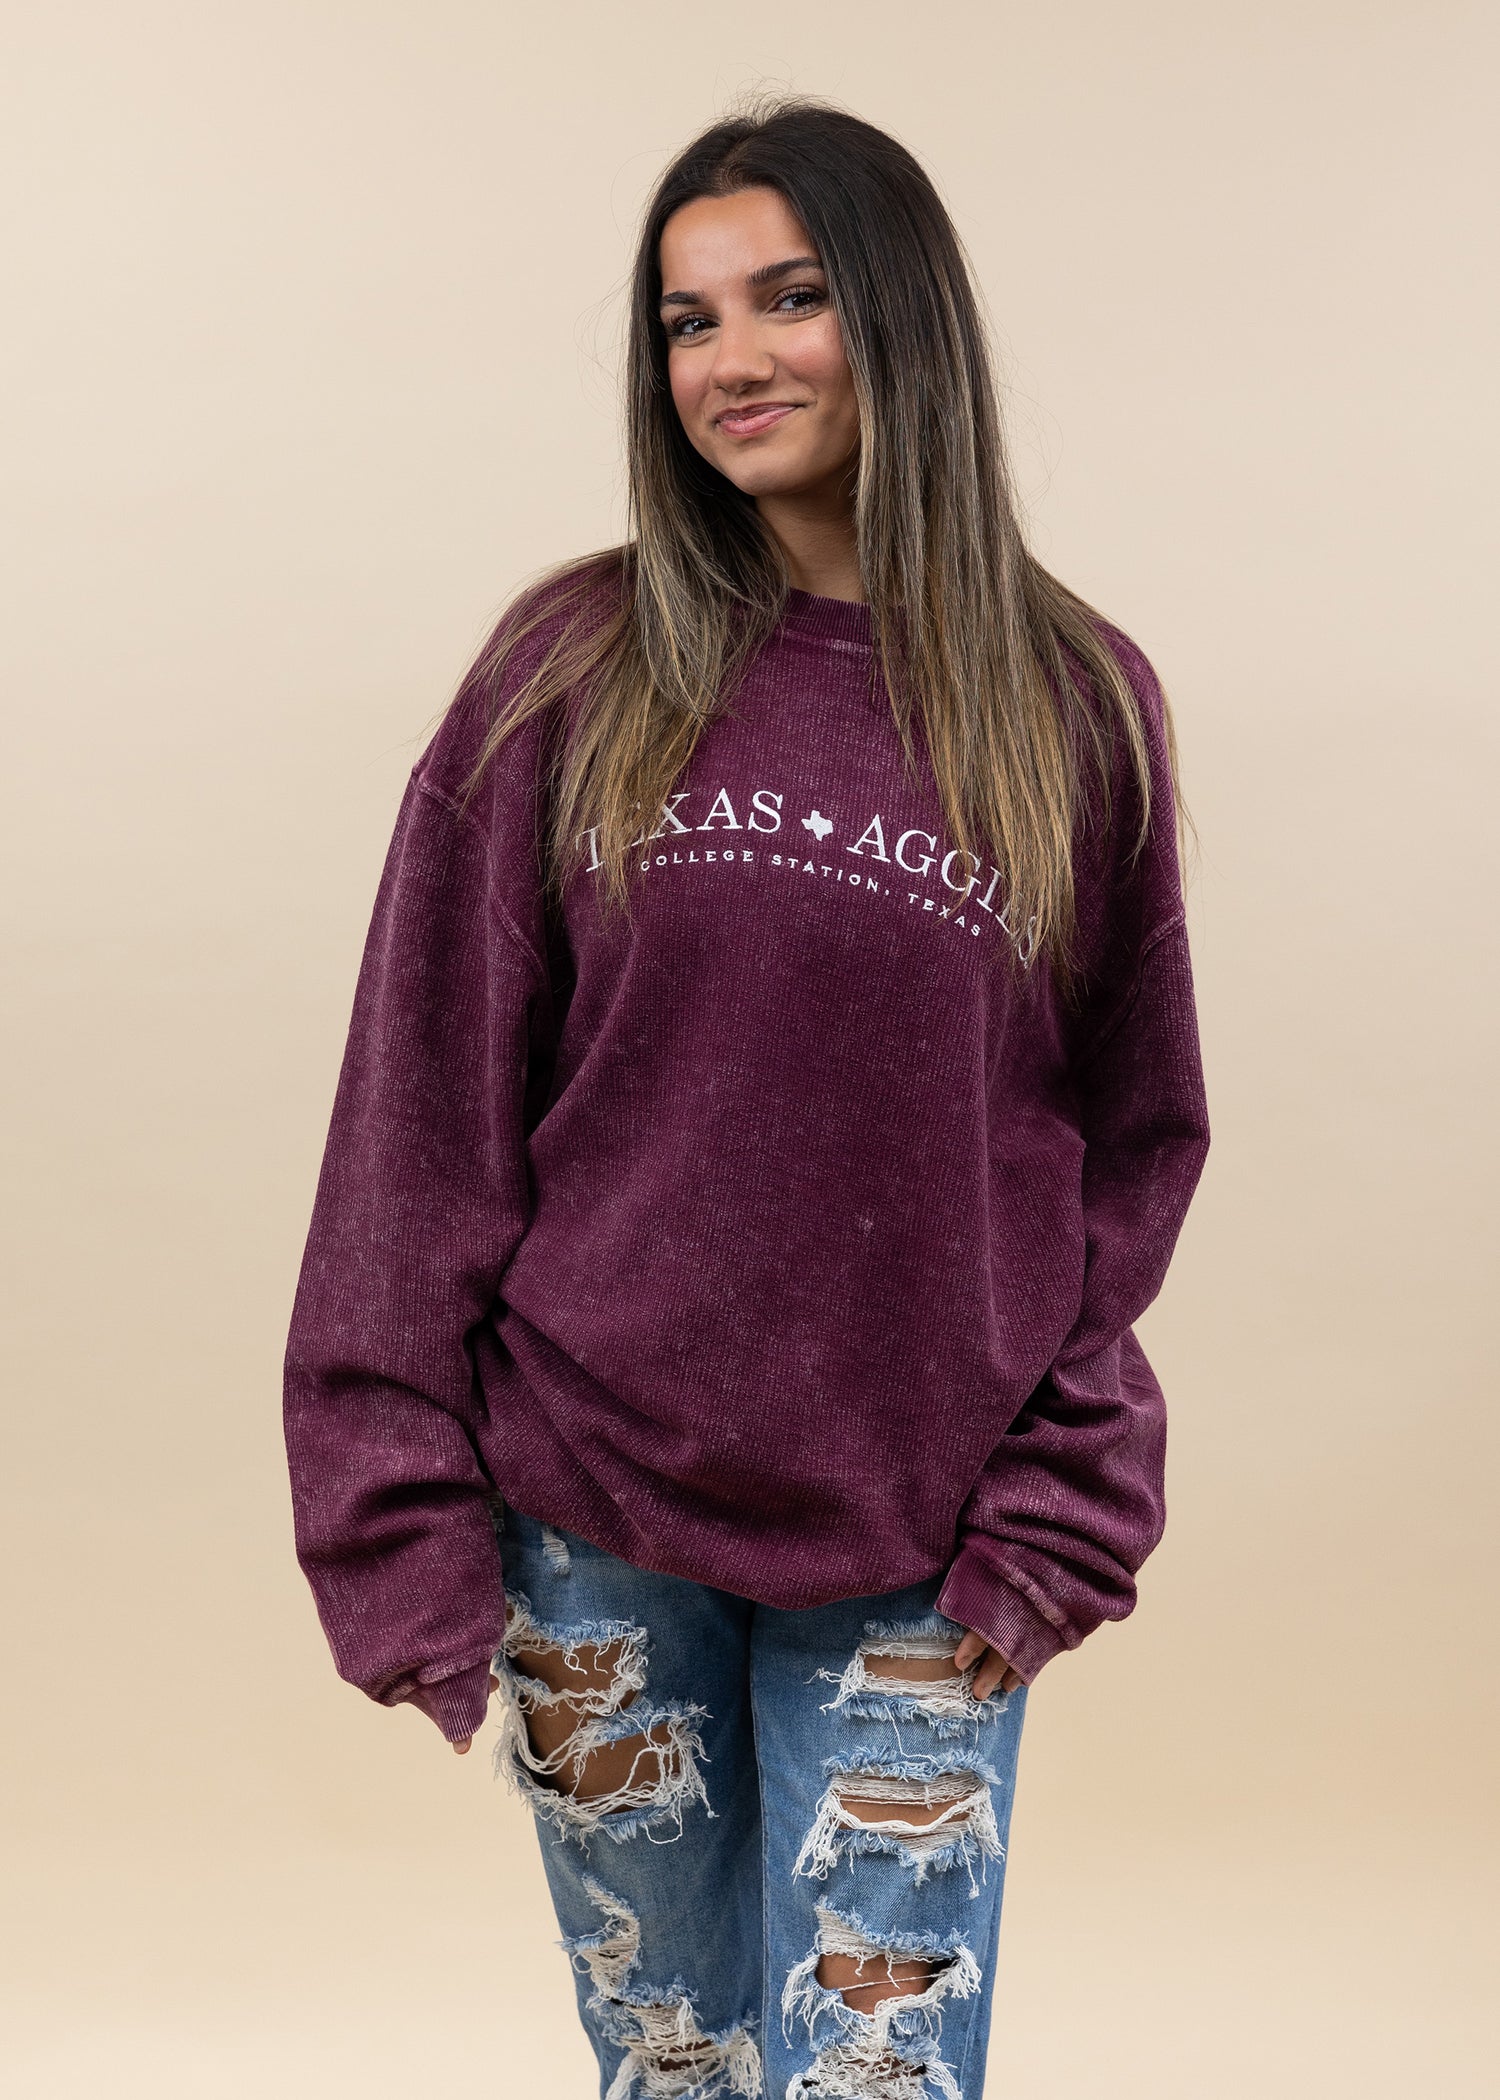 Texas Aggies Simple Embroidered Design Corduroy Pullover